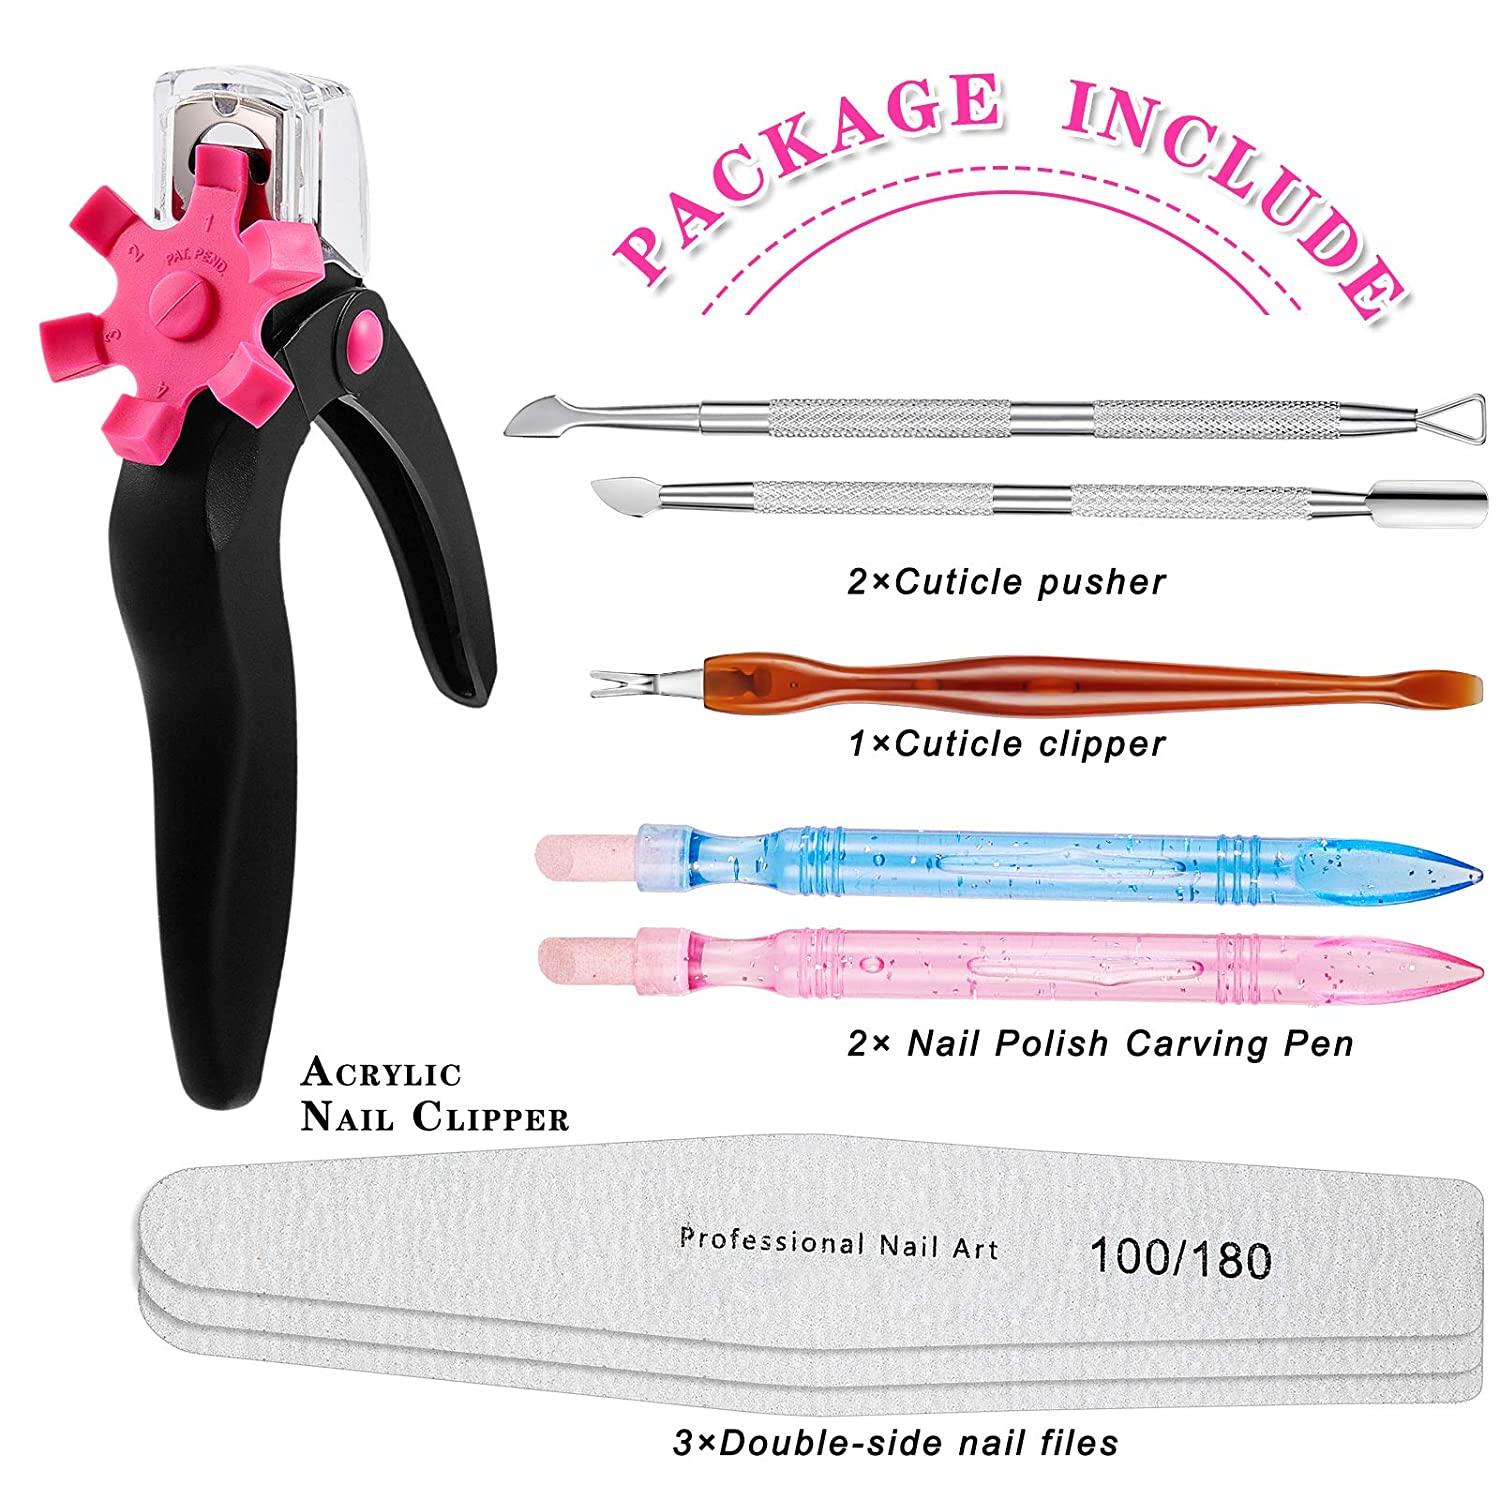 EN Electric Nail Wire Nail Polishing Machine Set With Replacement Handle  For Removing Dead Skin And Polished Nails Nanny Art Equipment 221206 From  Xuan007, $58.06 | DHgate.Com